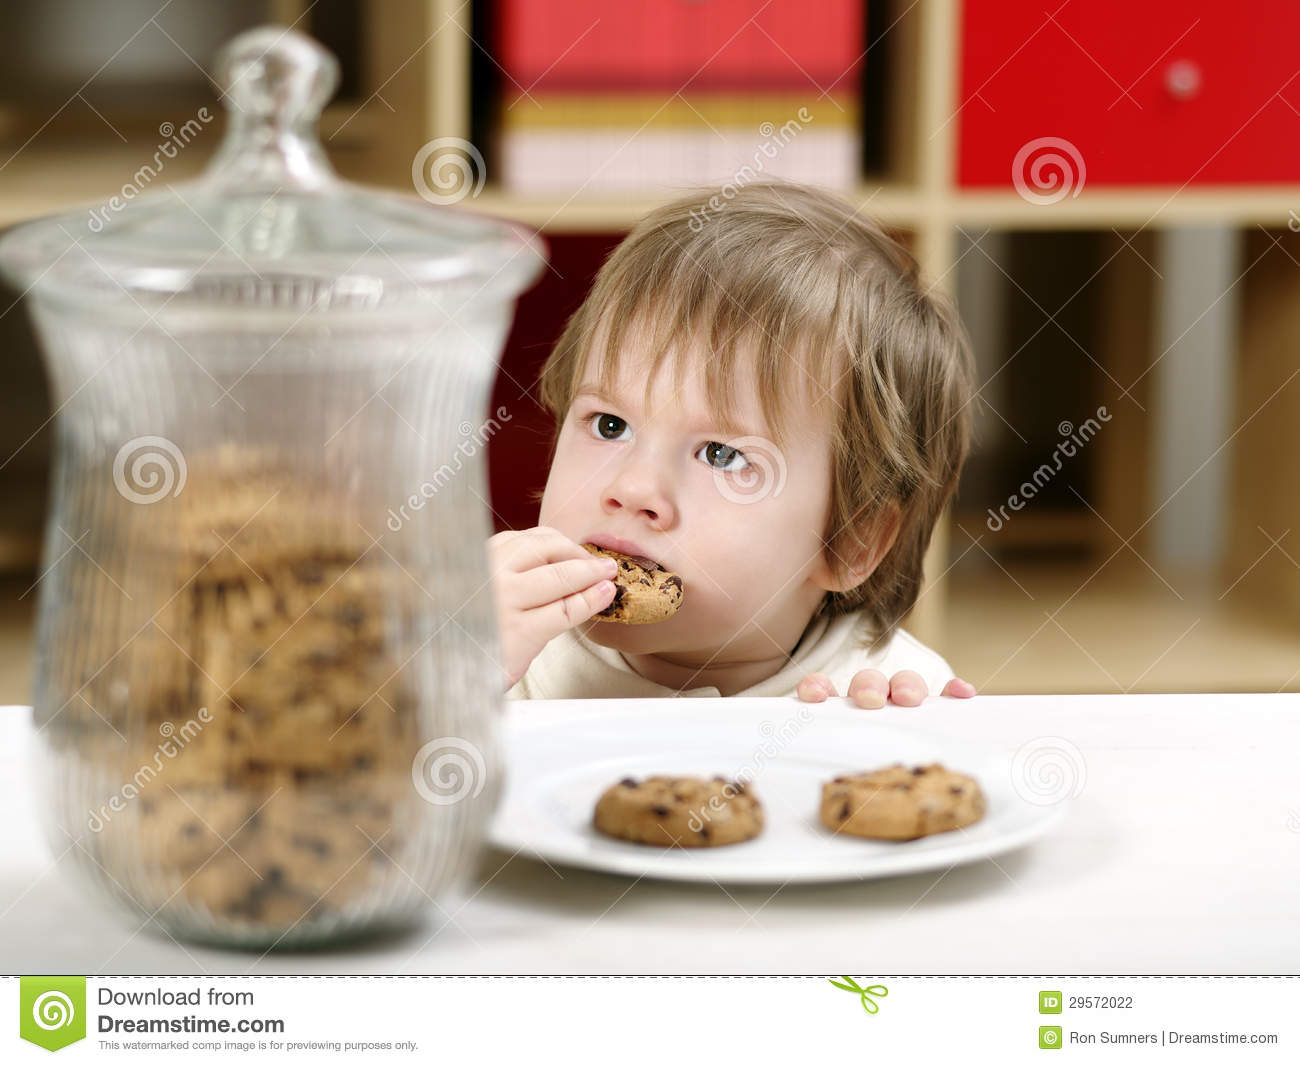 Photo Of A Nineteen Month Old Stealing Cookies From A Plate On A Table